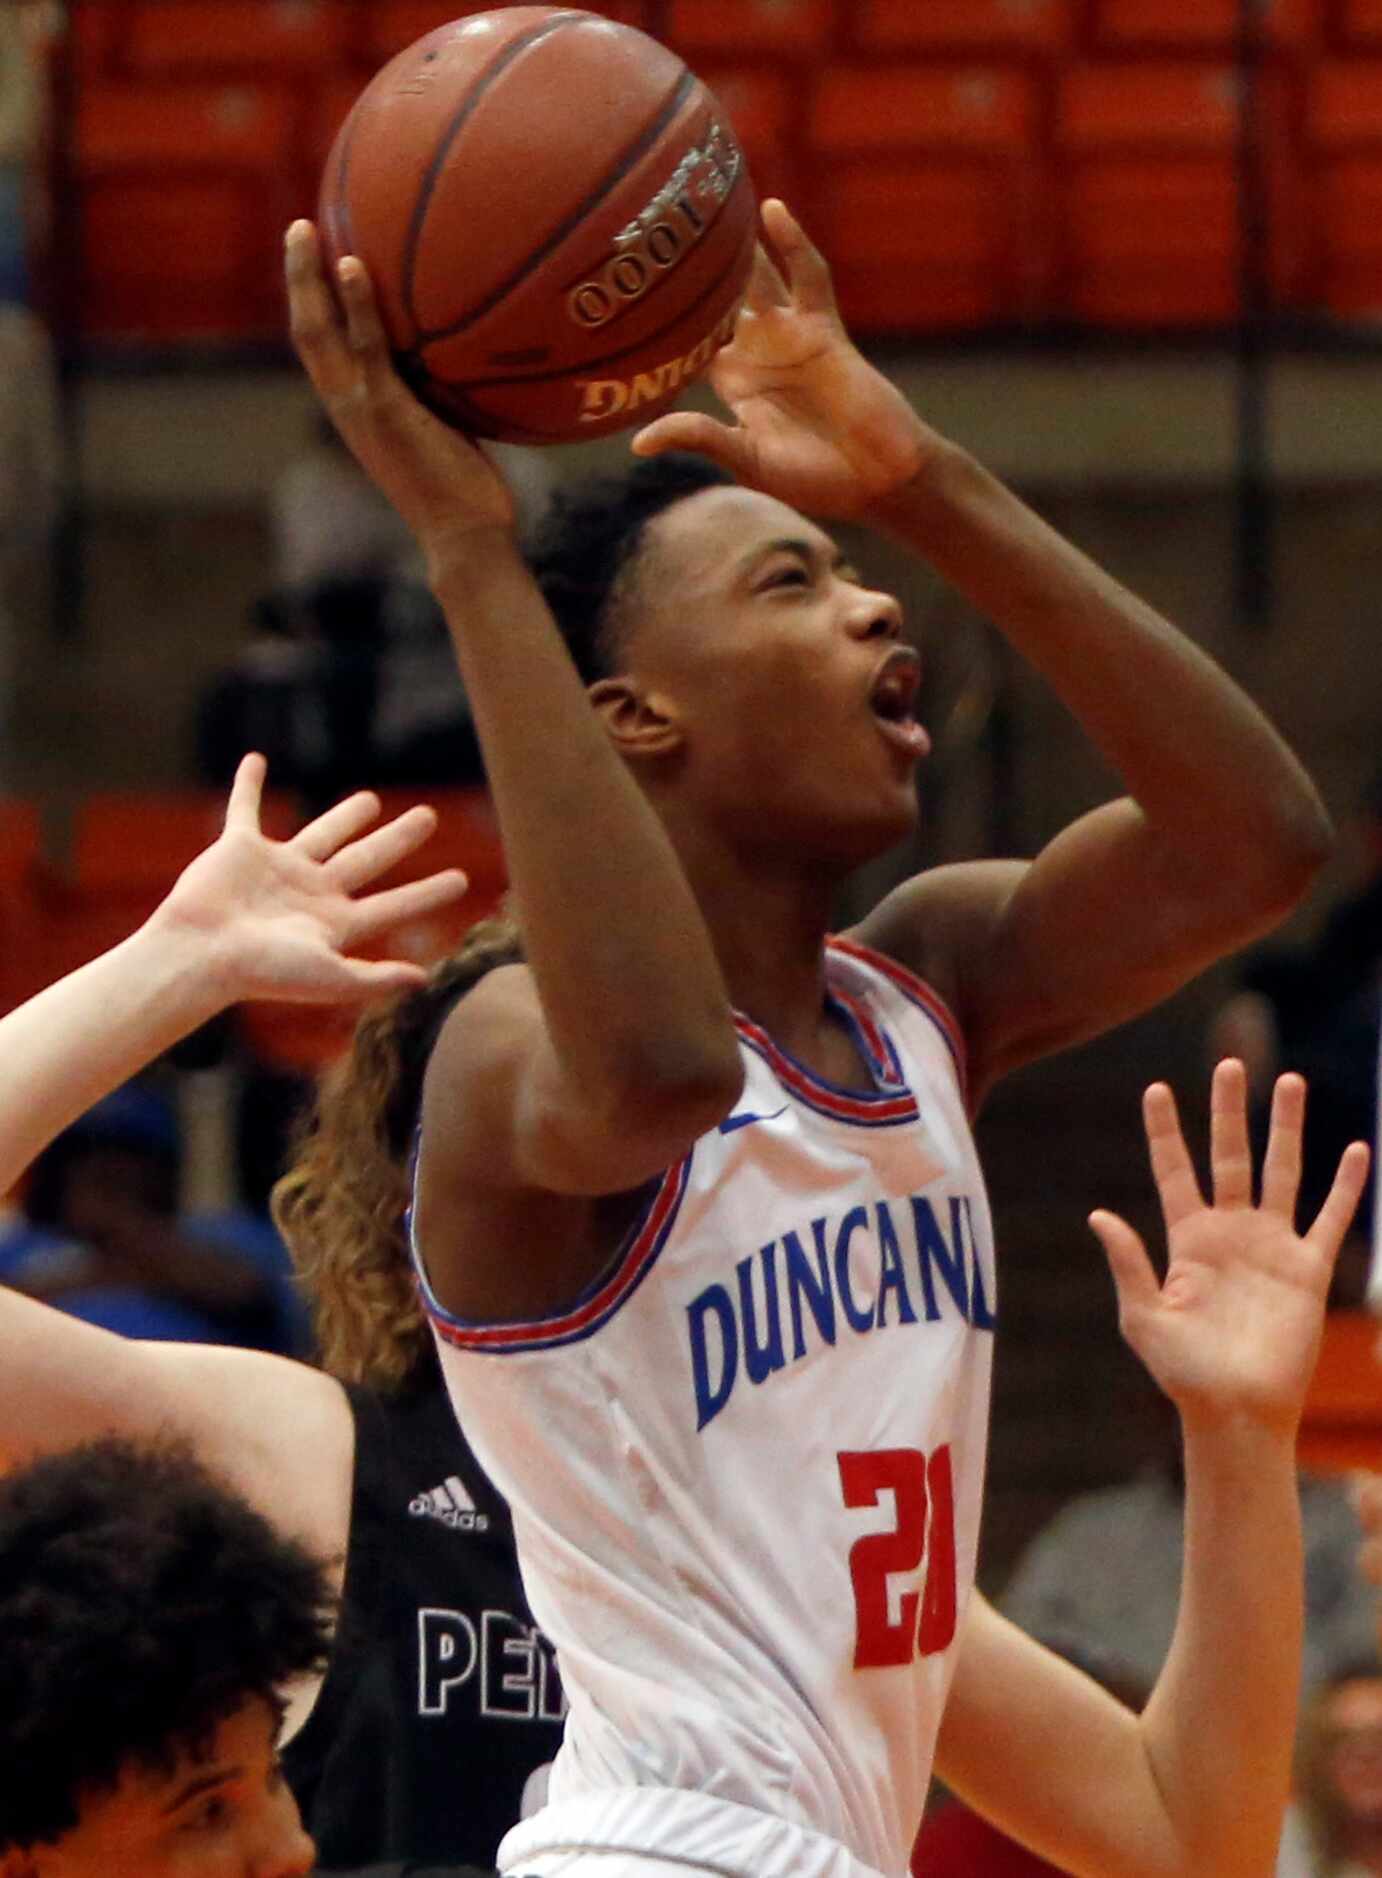 Duncanville guard Evan Phelps (21) winces as he is fouled while driving the lane during...